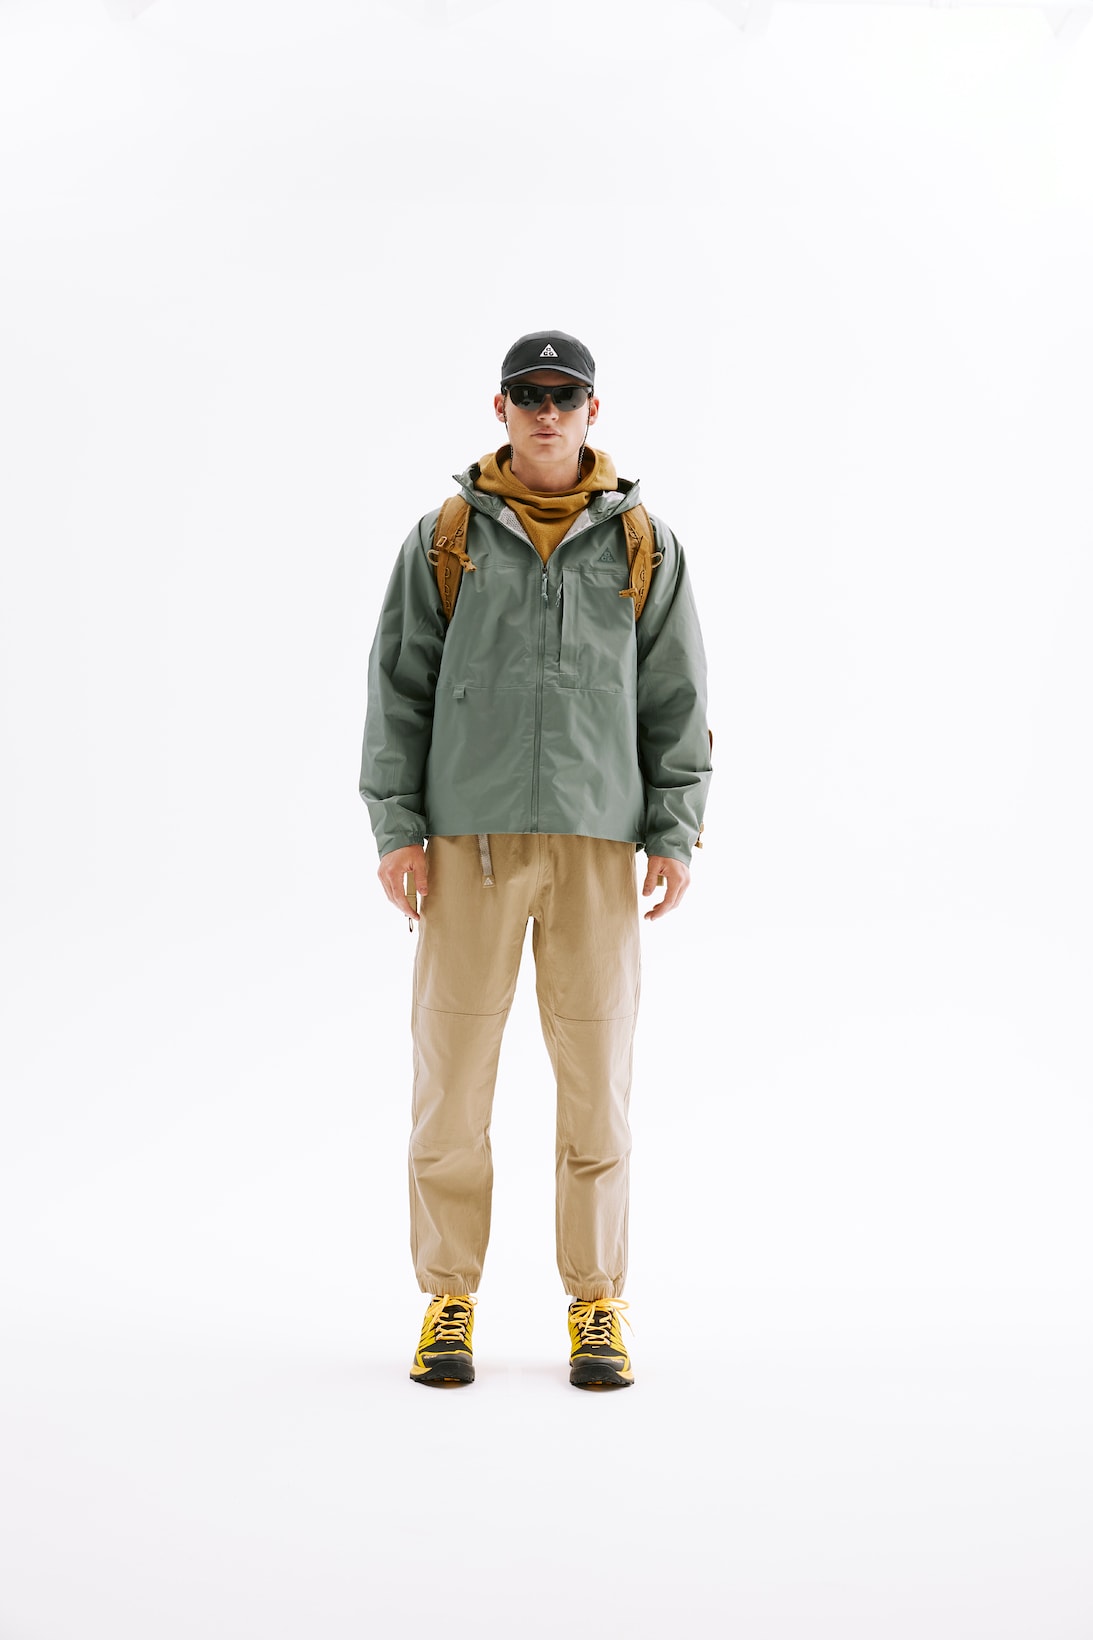 nike acg collection sivasdescalzo svd immersive virtual reality experience jacket outerwear pants hat shades